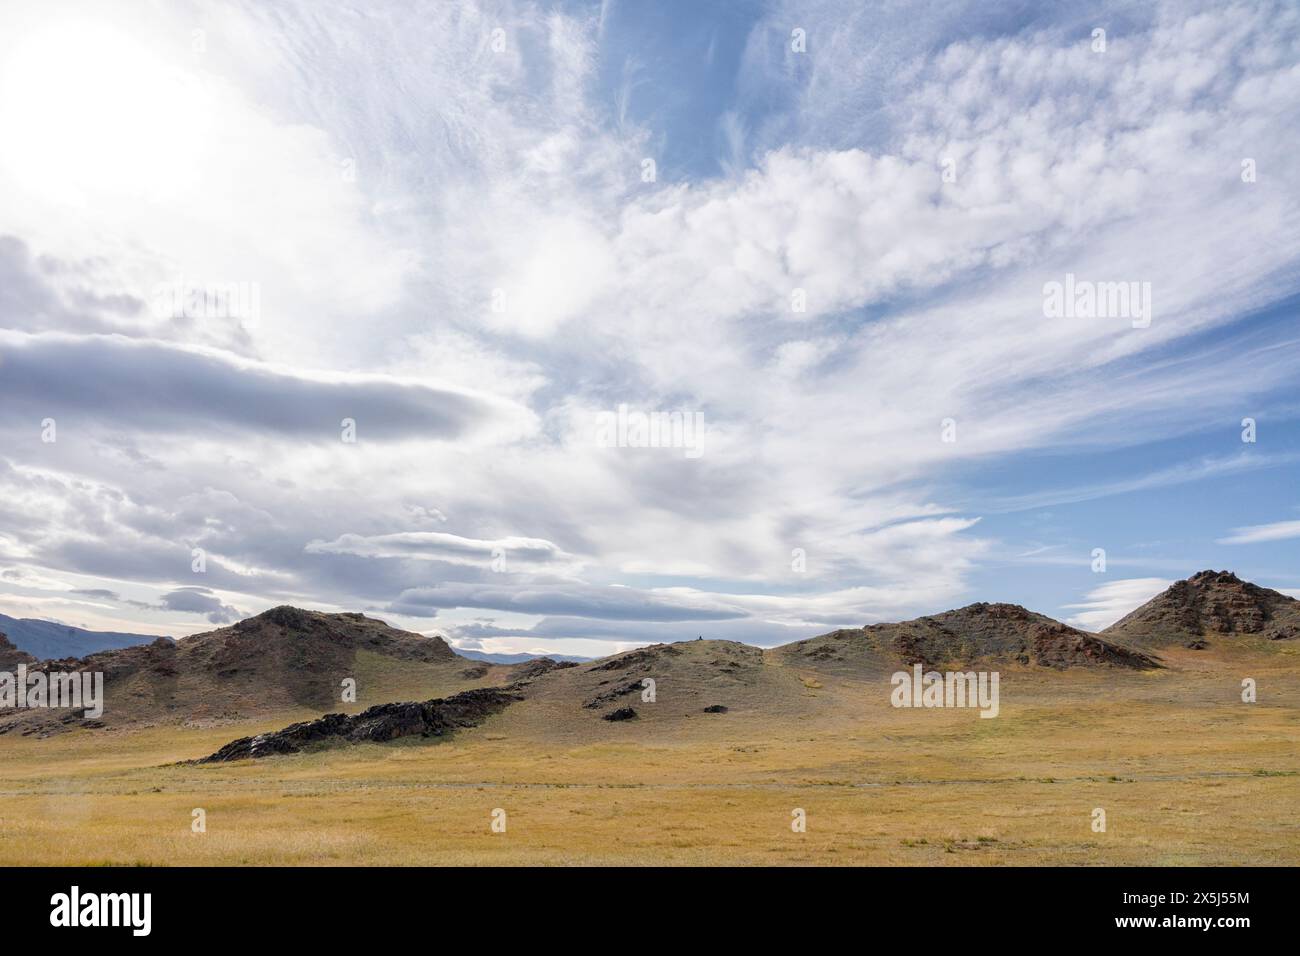 Asia, Mongolia, Bayan-Olgii Province. Rocky outcrops are typical of the landscape in this province. Stock Photo